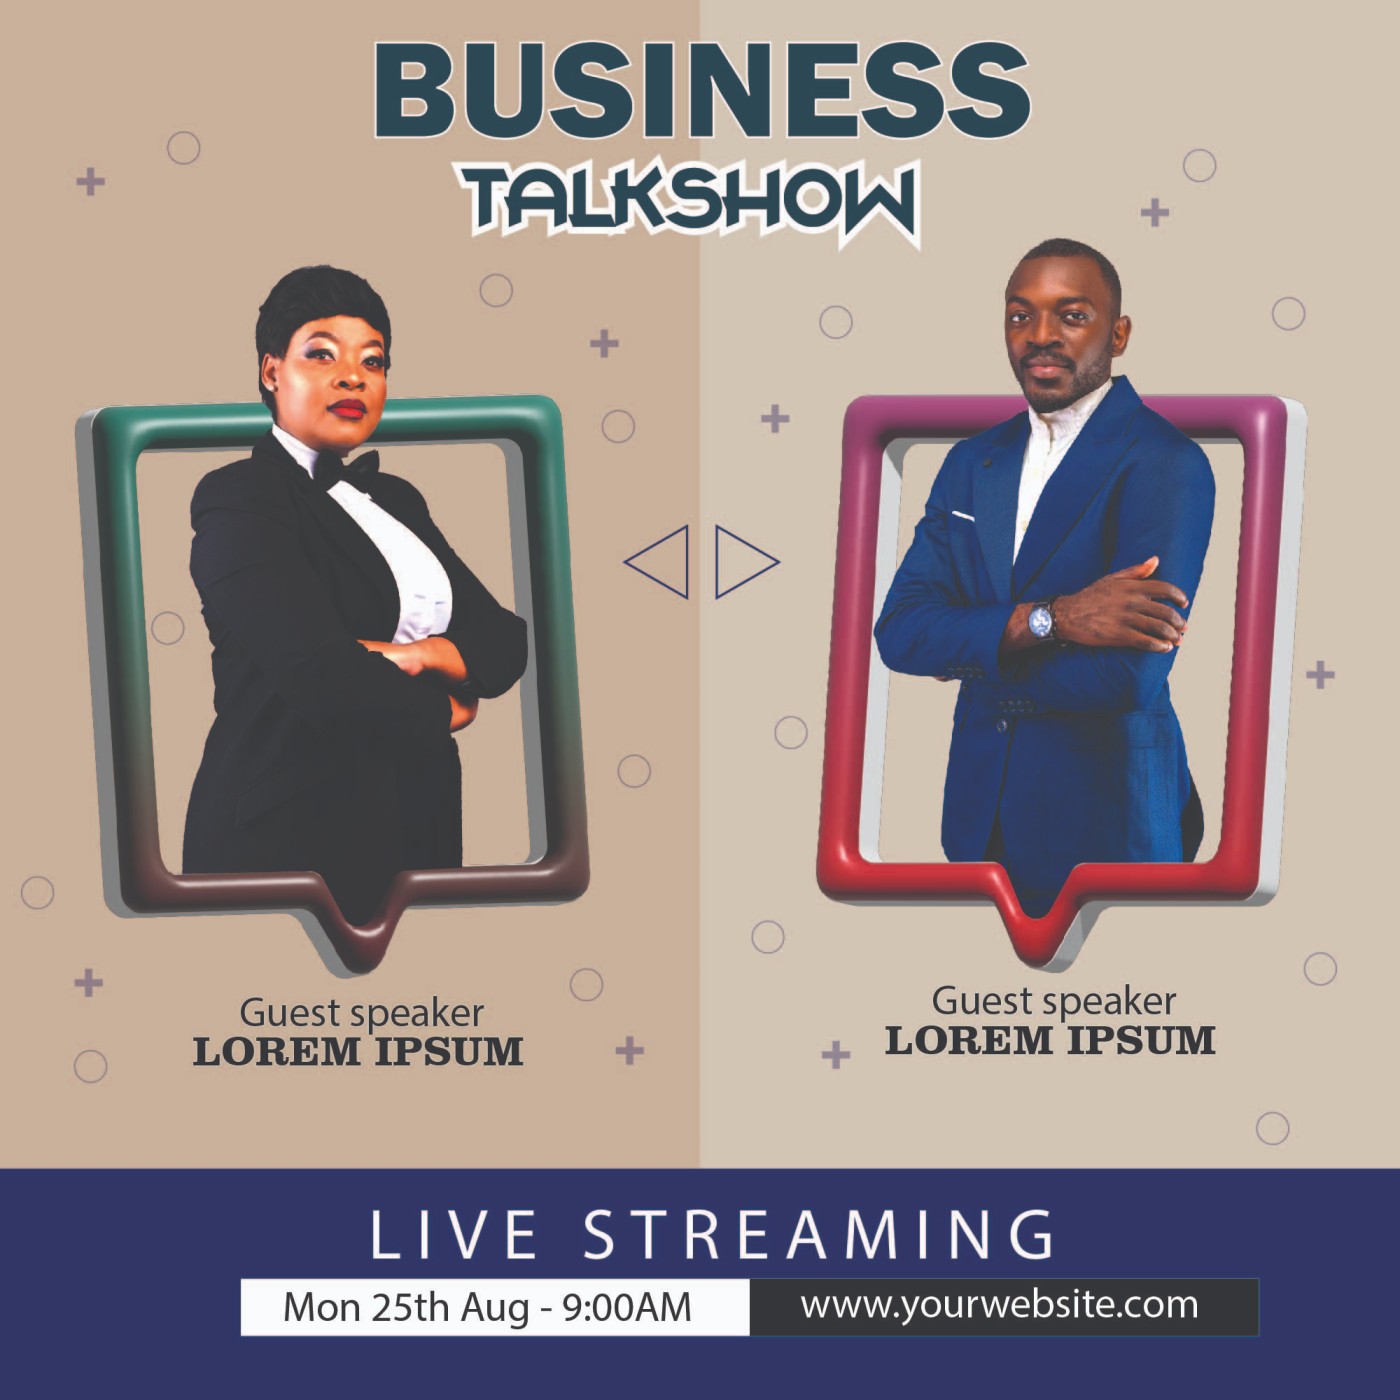 Poster for a business talk show with two men in suits by Ben Enwonwu.